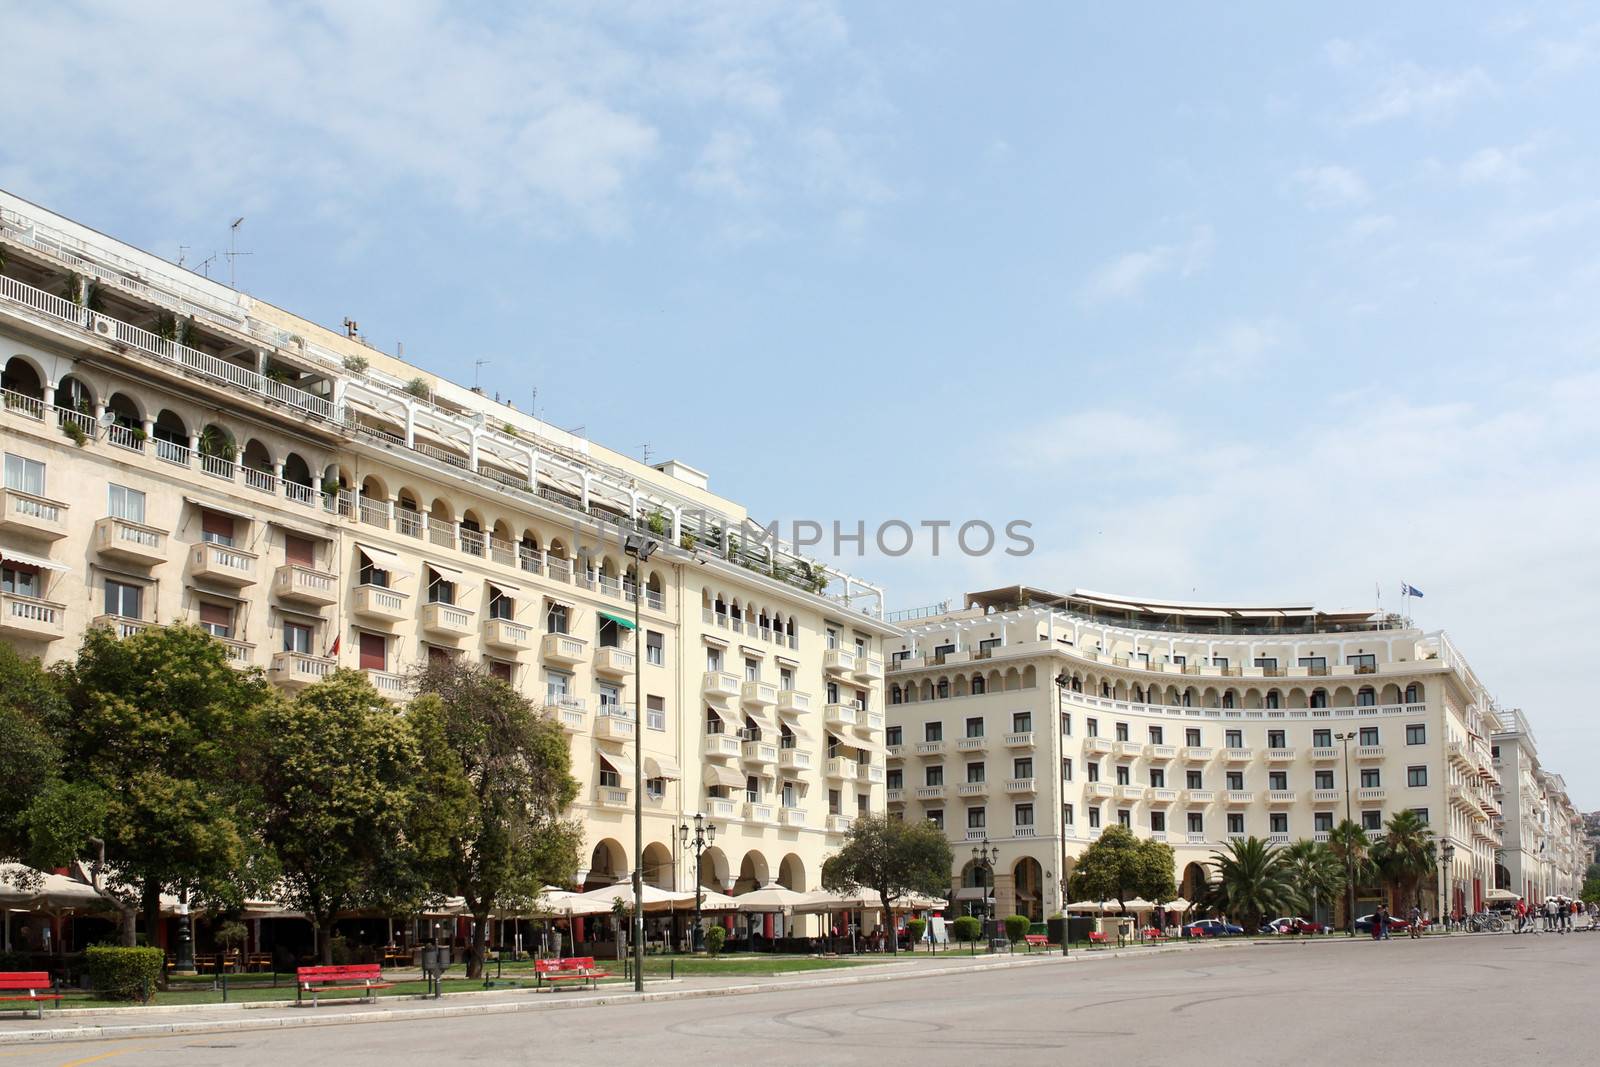 aristotelous square and buildings Thessaloniki Greece by goce